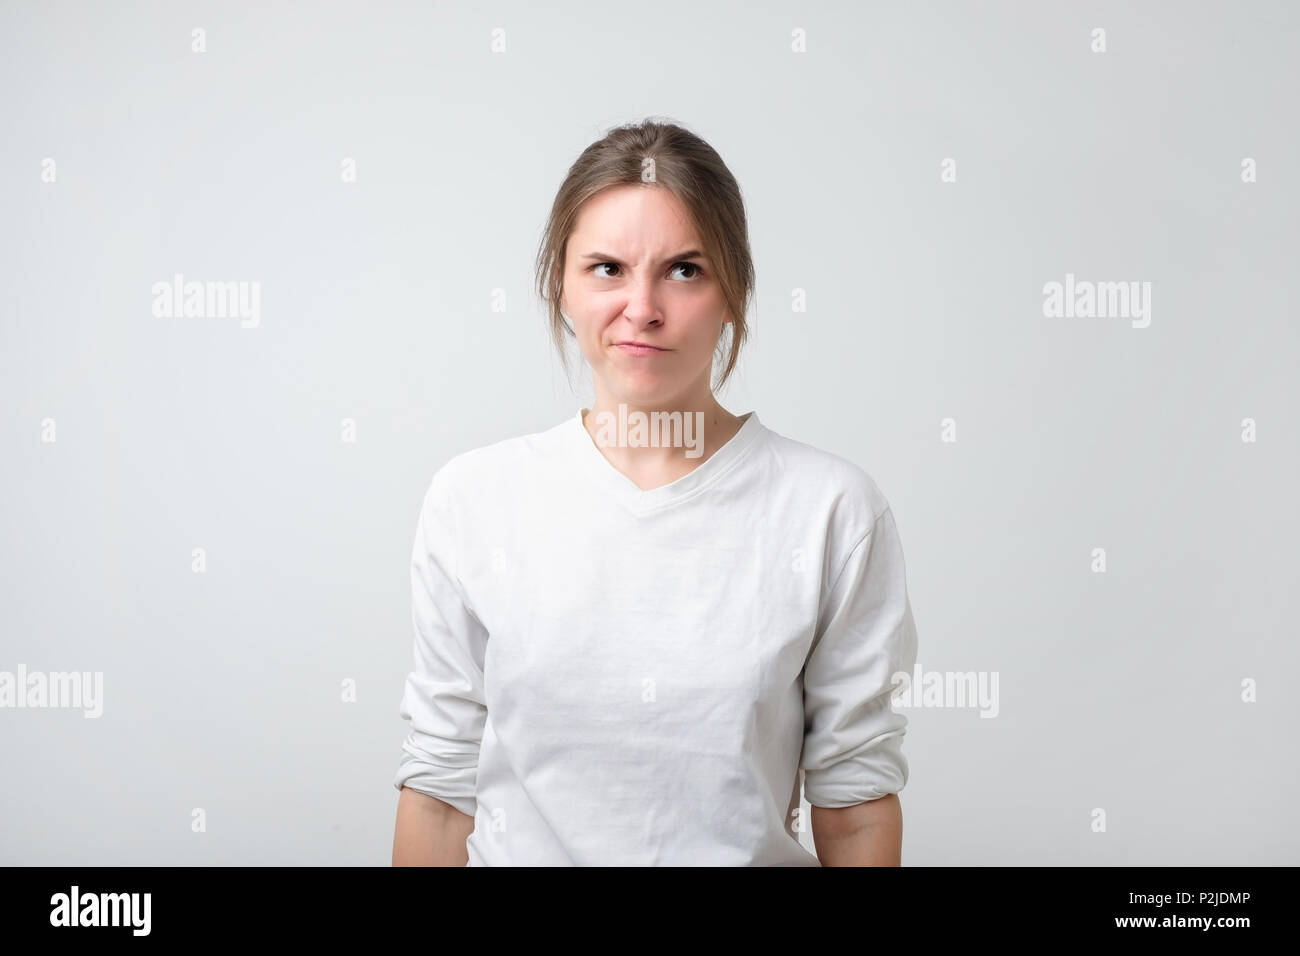 Portrait of an upset unsatisfied european woman. She is frowning her nose in irritated mood. Negative facial emotion Stock Photo